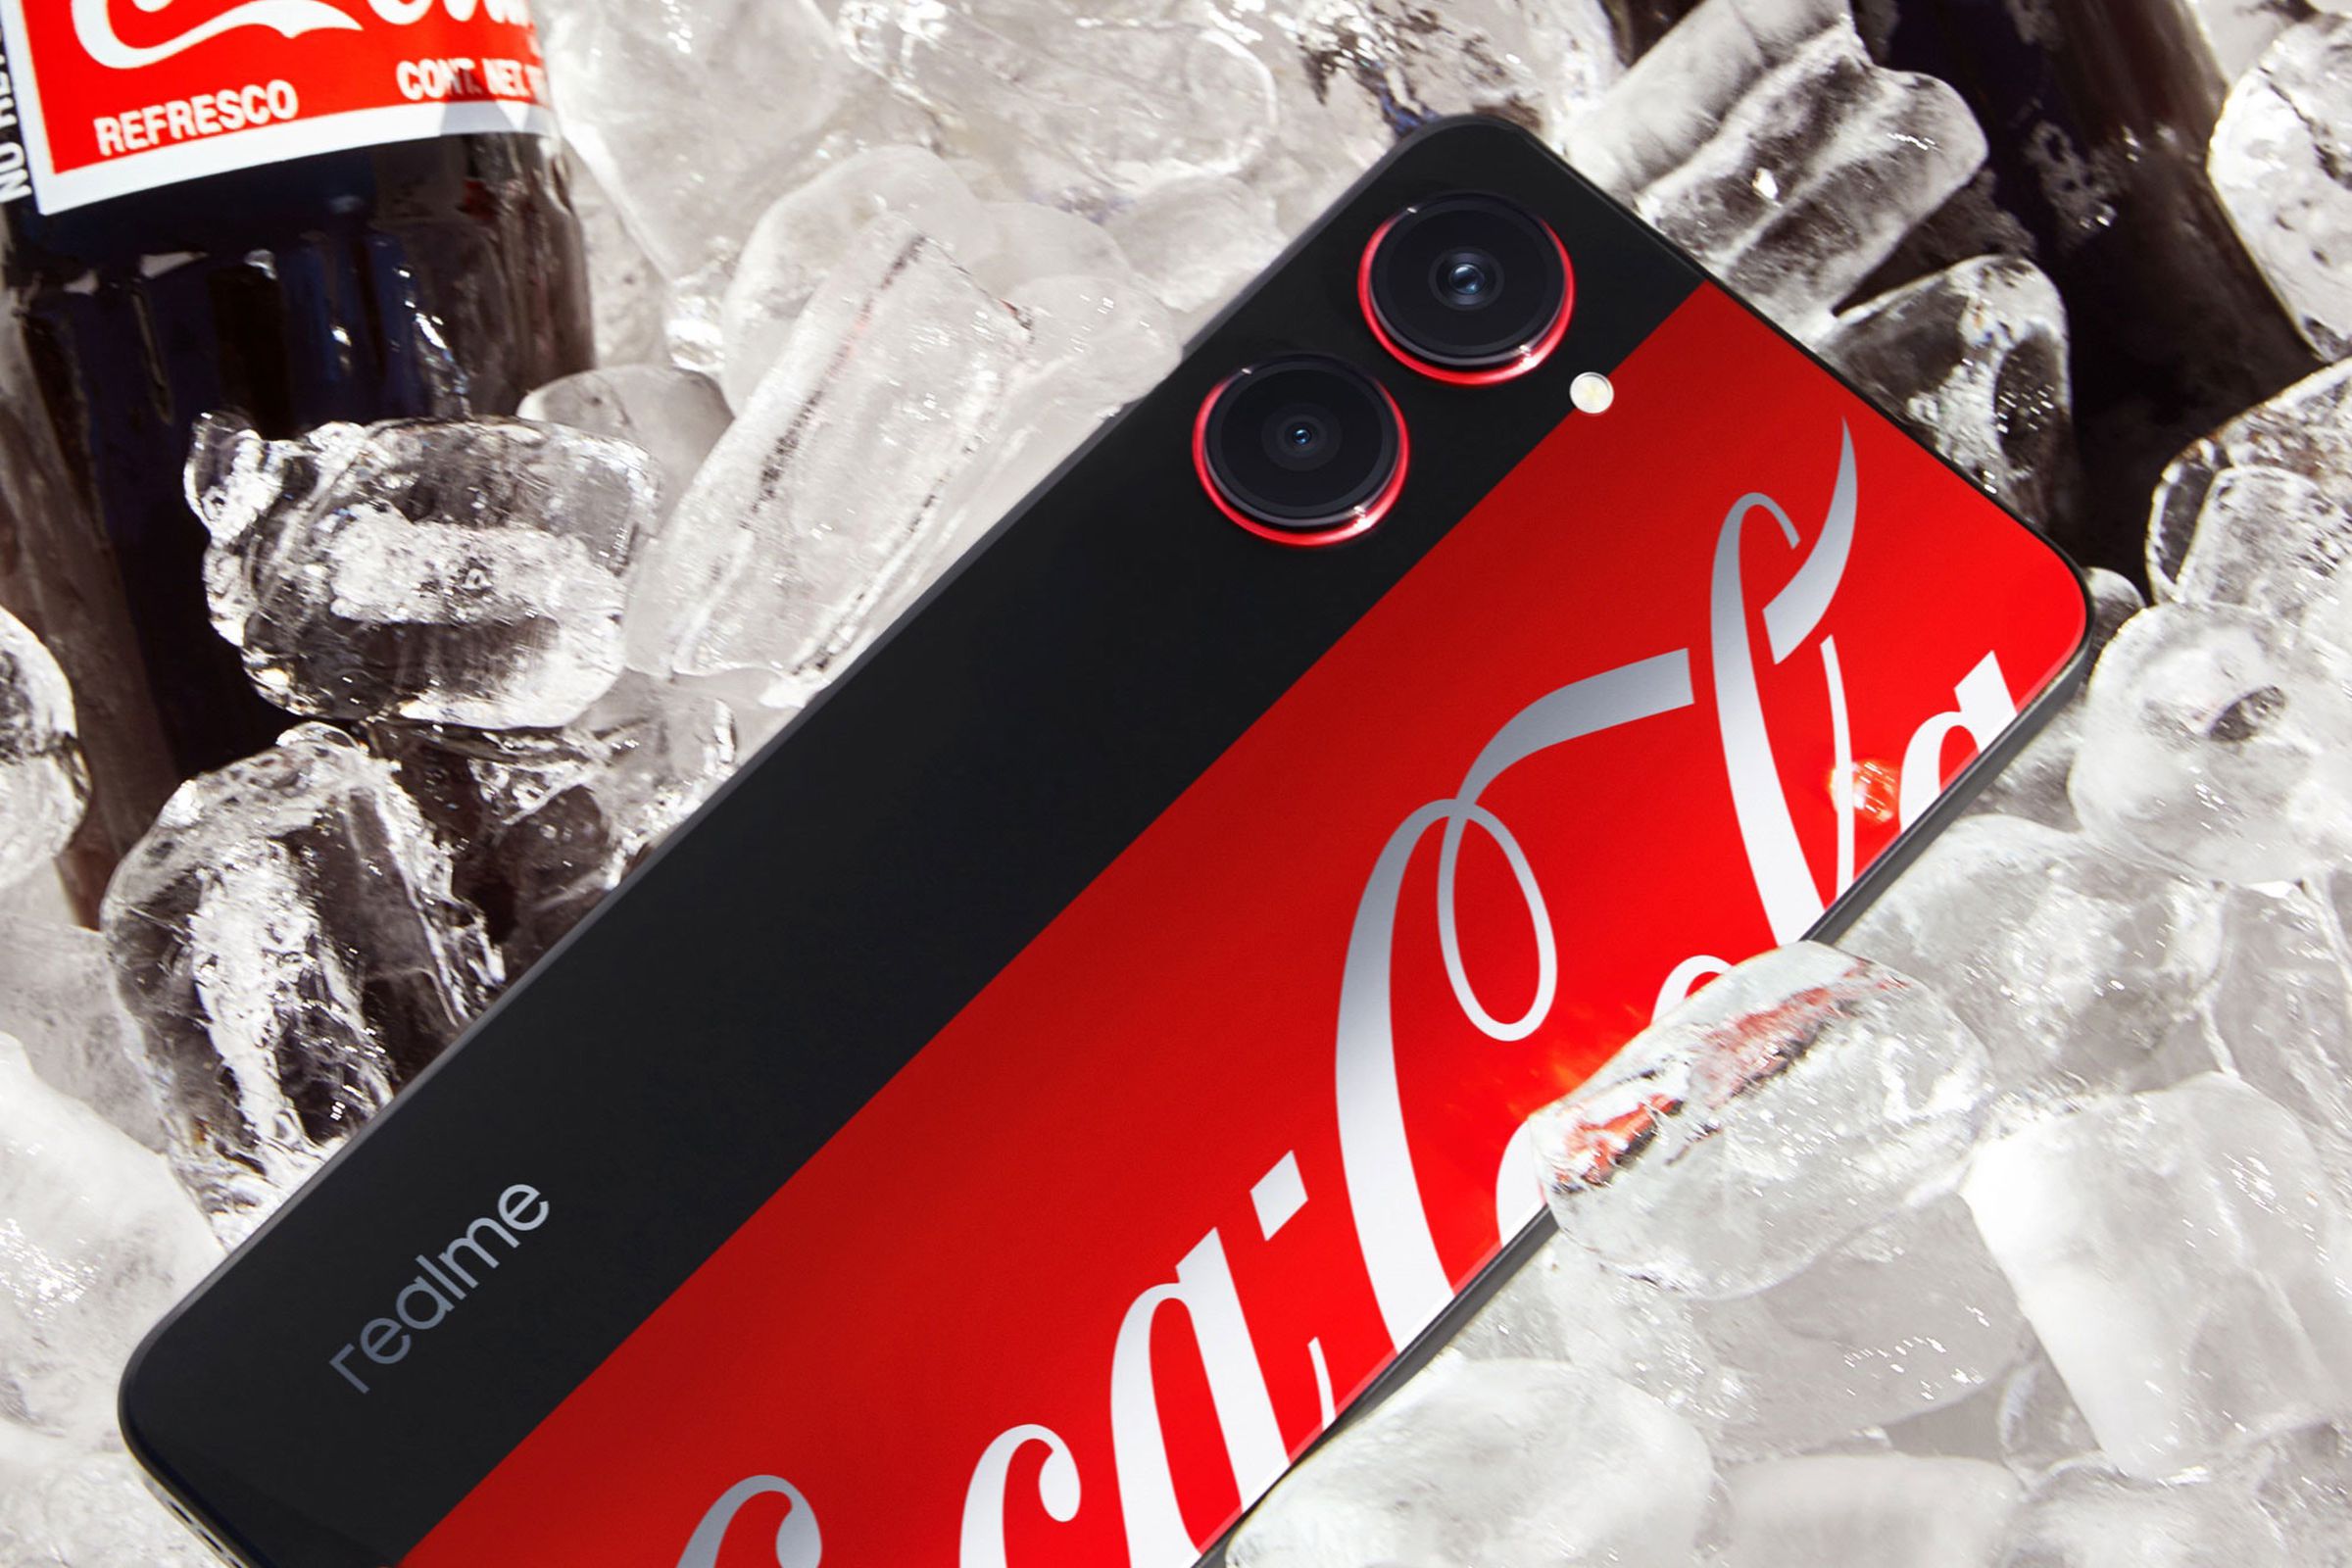 Realme Coca-Cola phone on a bed of ice next to a bottle of Coca-Cola.